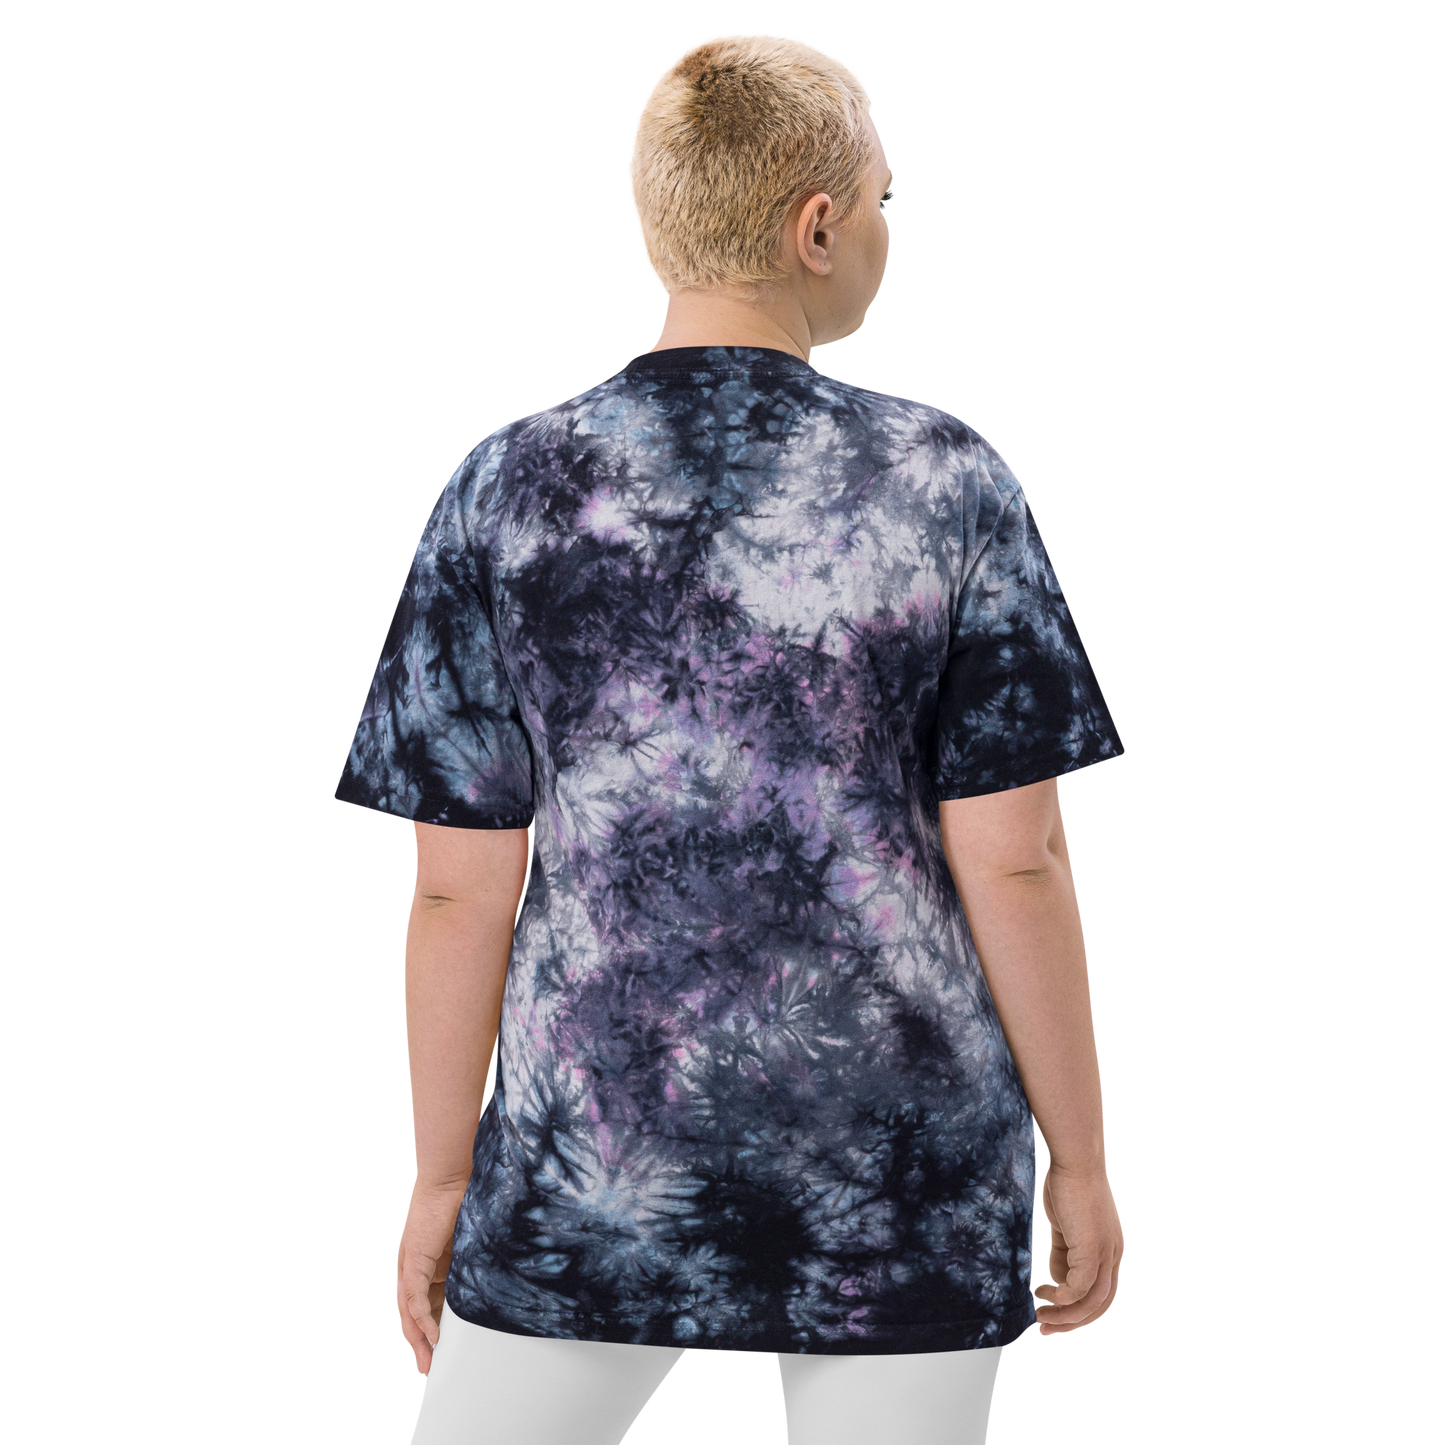 Crossed-X Oversized Tie-Dye T-Shirt • YVR Vancouver • YHM Designs - Image 06